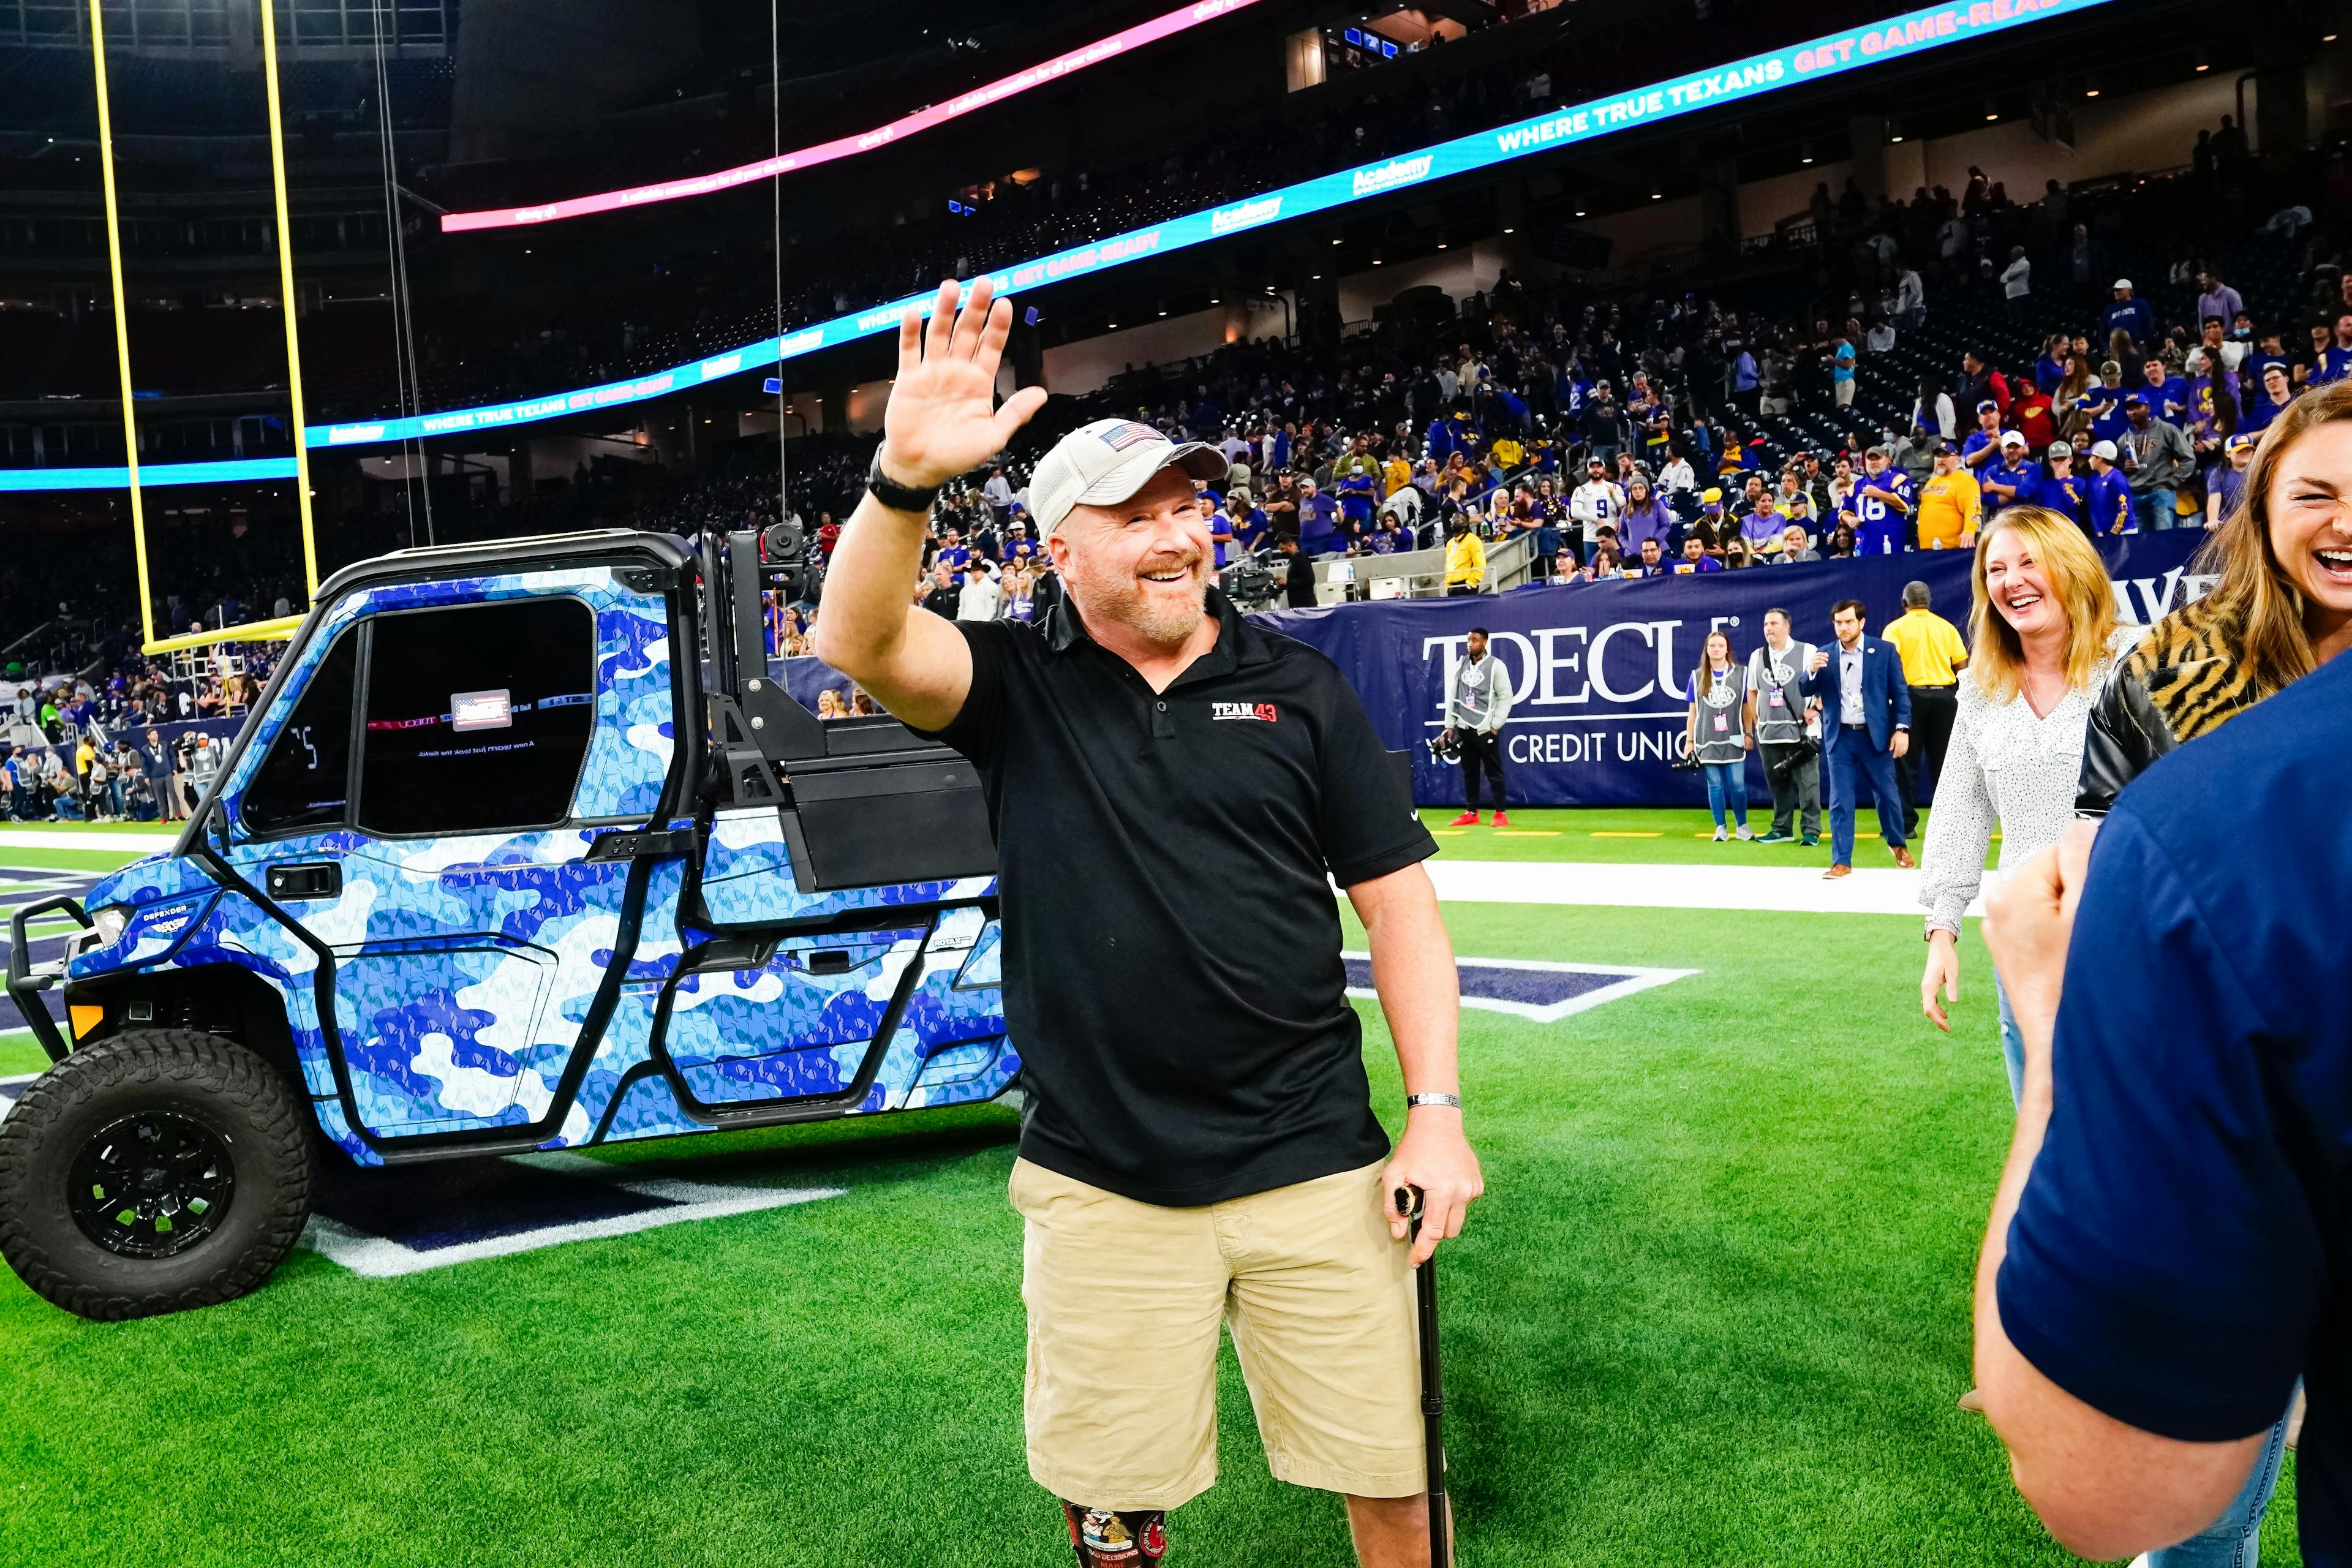 Pete Way being presented with a UTV at a college bowl game.